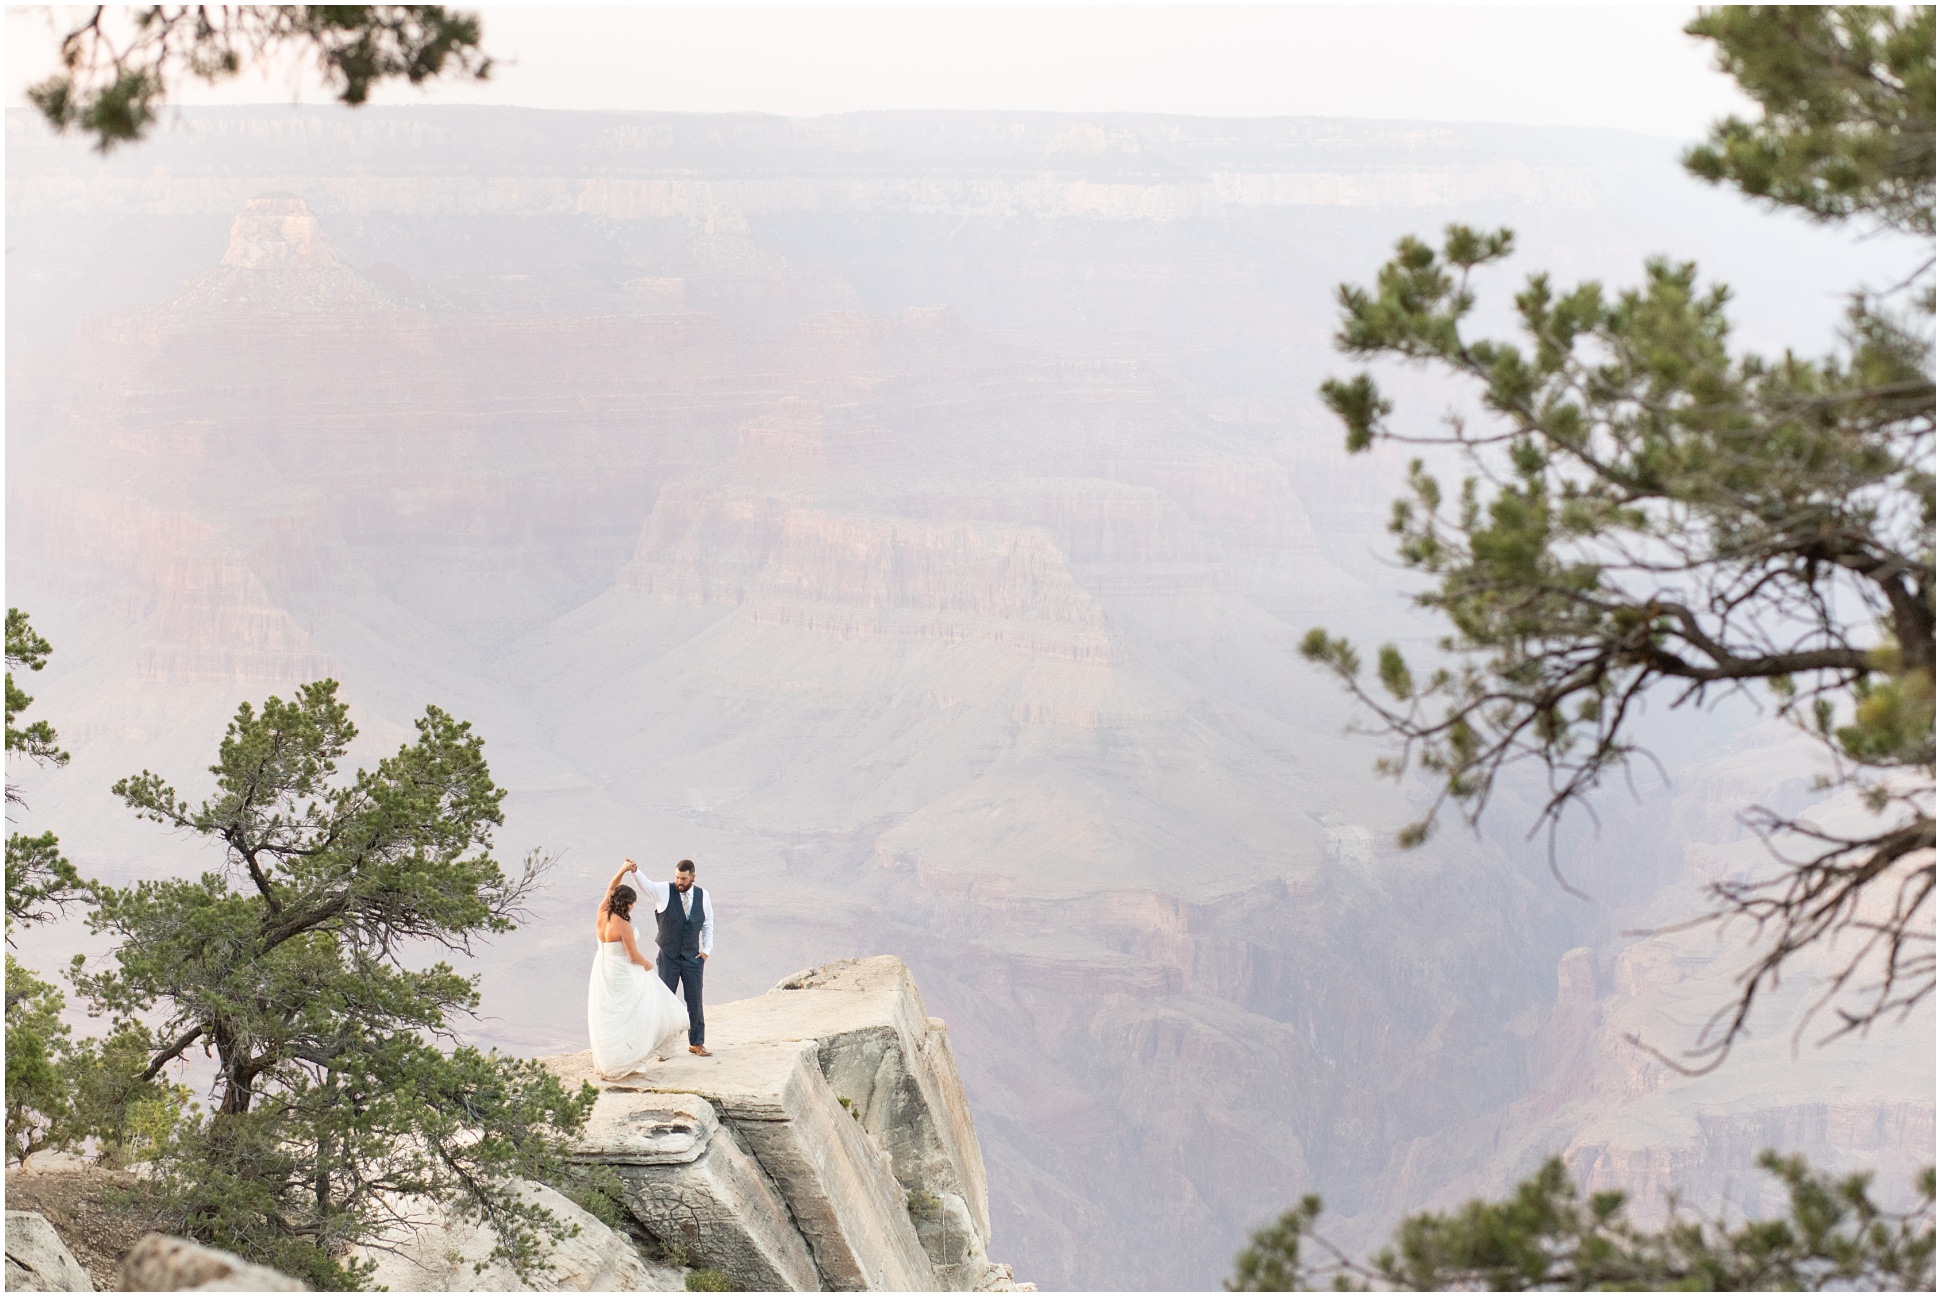 Groom twirling his bride out on the rock of the Southern Rim of the Grand Canyon